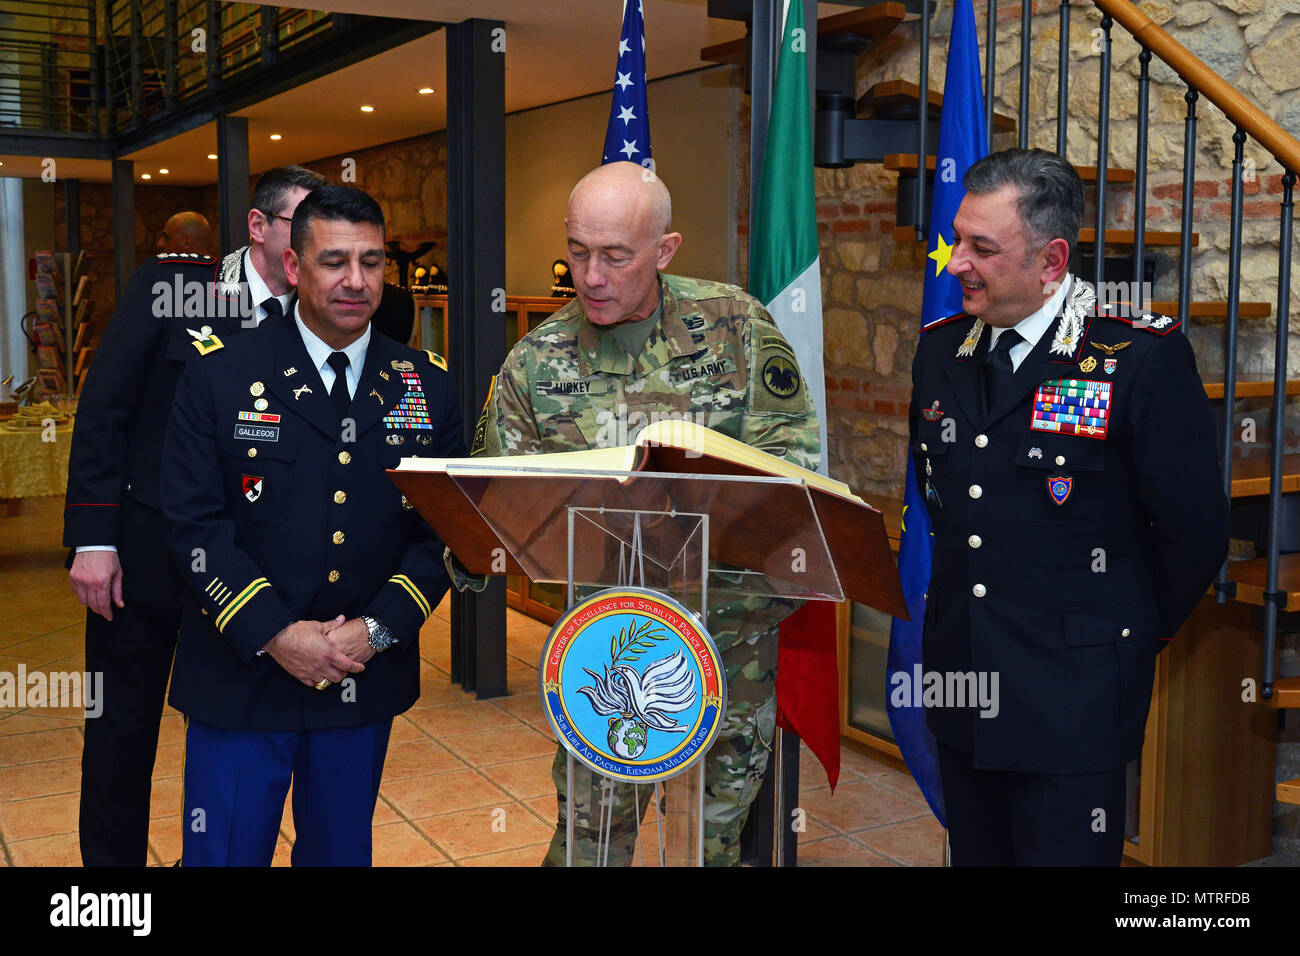 U.S. Army Col. Darius S. Gallegos (left), Center of Excellence for Stability Police Units (CoESPU) deputy director and Brig. Gen. Giovanni Pietro Barbano , (CoESPU) director, look Lt. Gen. Charles D. Luckey (center), Commanding General U.S. Army Reserve Command, sign the guestbook, during visit at Center of Excellence for Stability Police Units (CoESPU) Vicenza, Italy, January 20, 2017.(U.S. Army Photo by Visual Information Specialist Paolo Bovo/released) Stock Photo